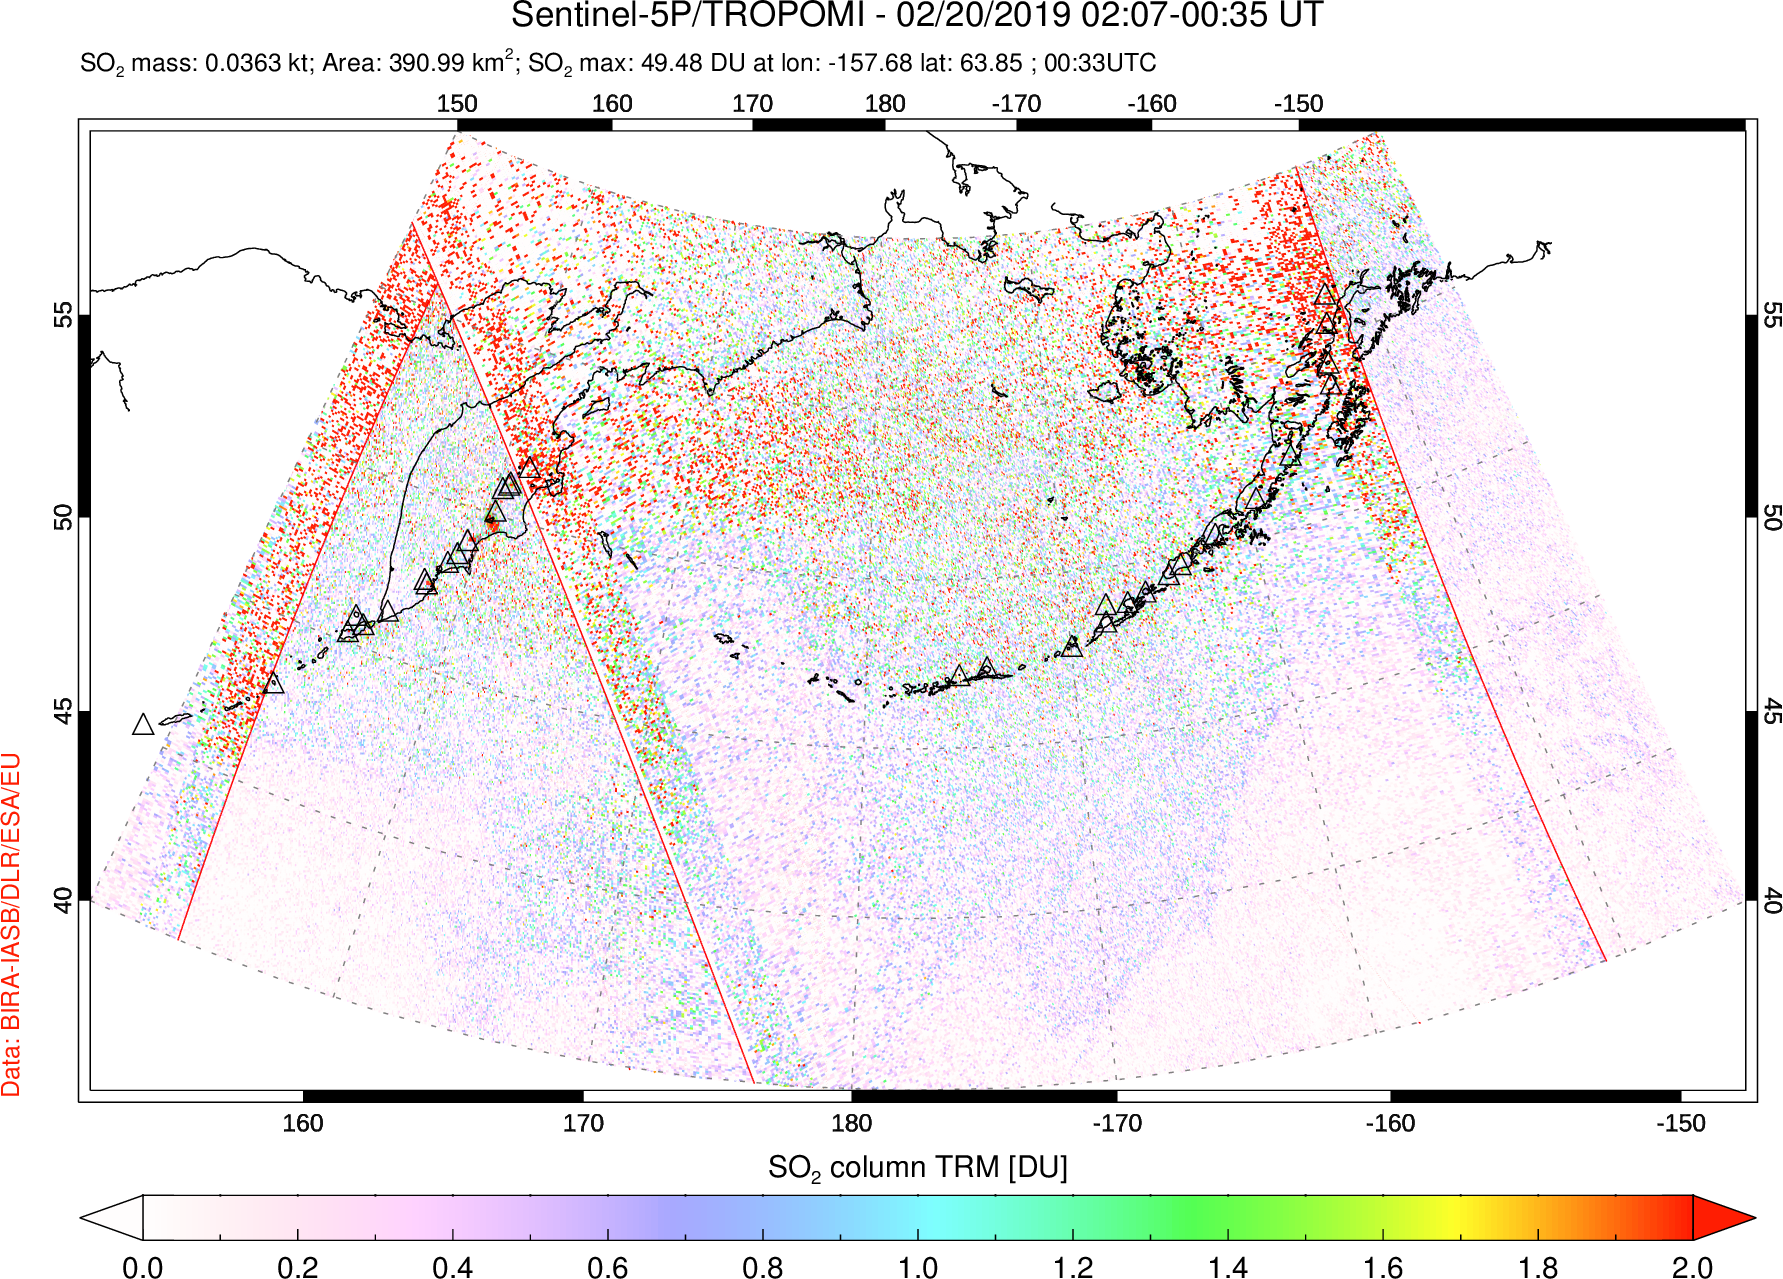 A sulfur dioxide image over North Pacific on Feb 20, 2019.